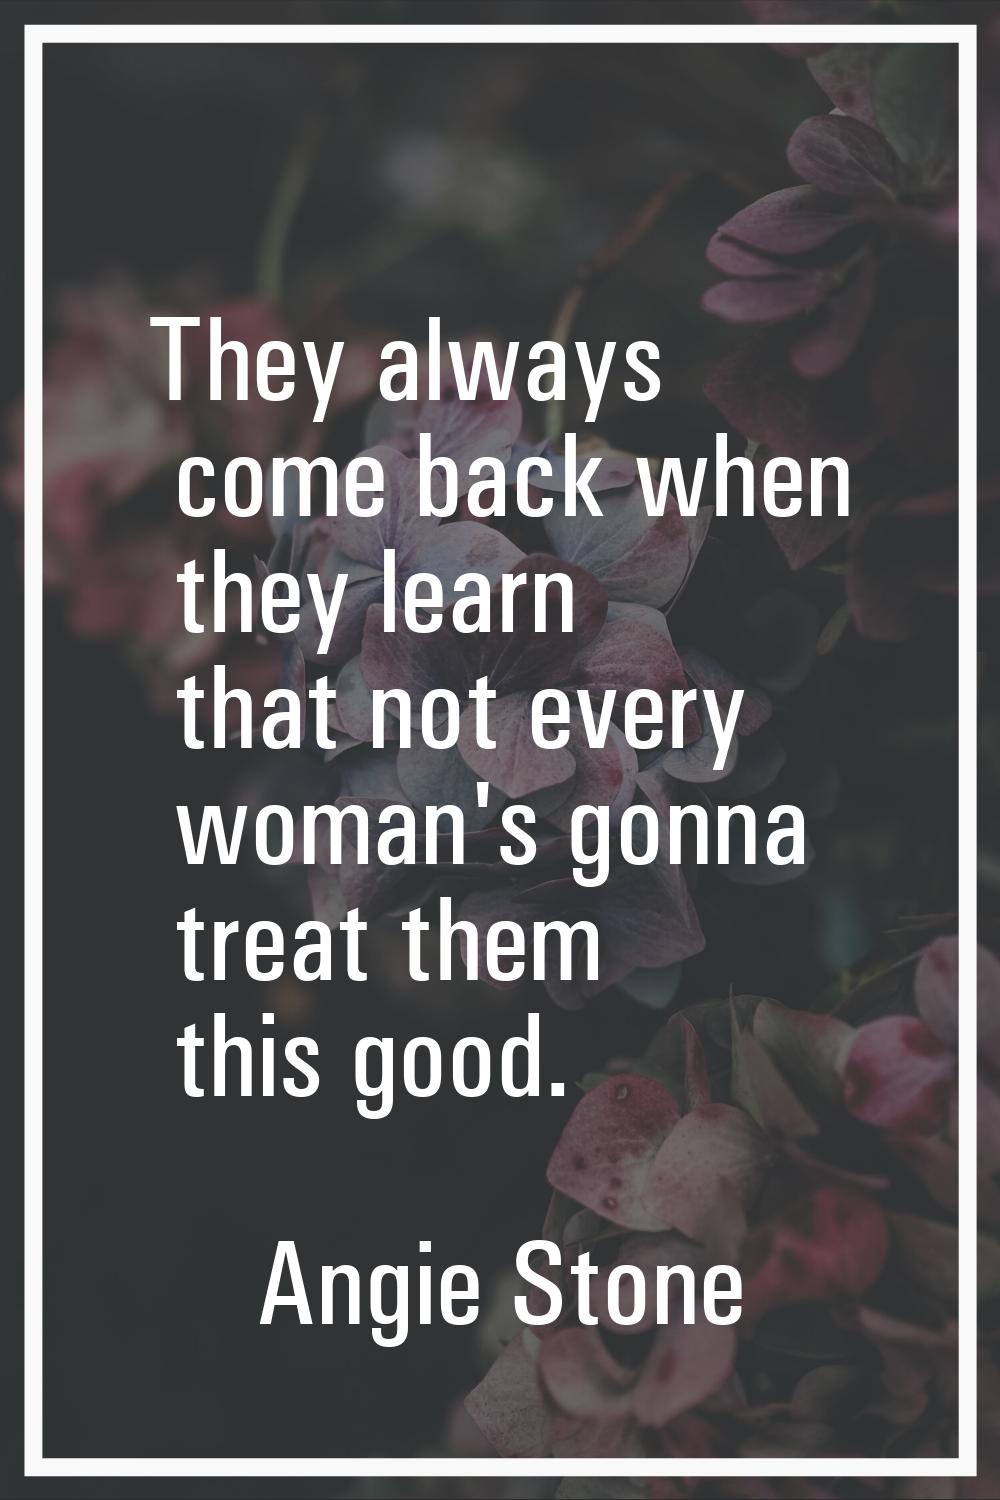 They always come back when they learn that not every woman's gonna treat them this good.